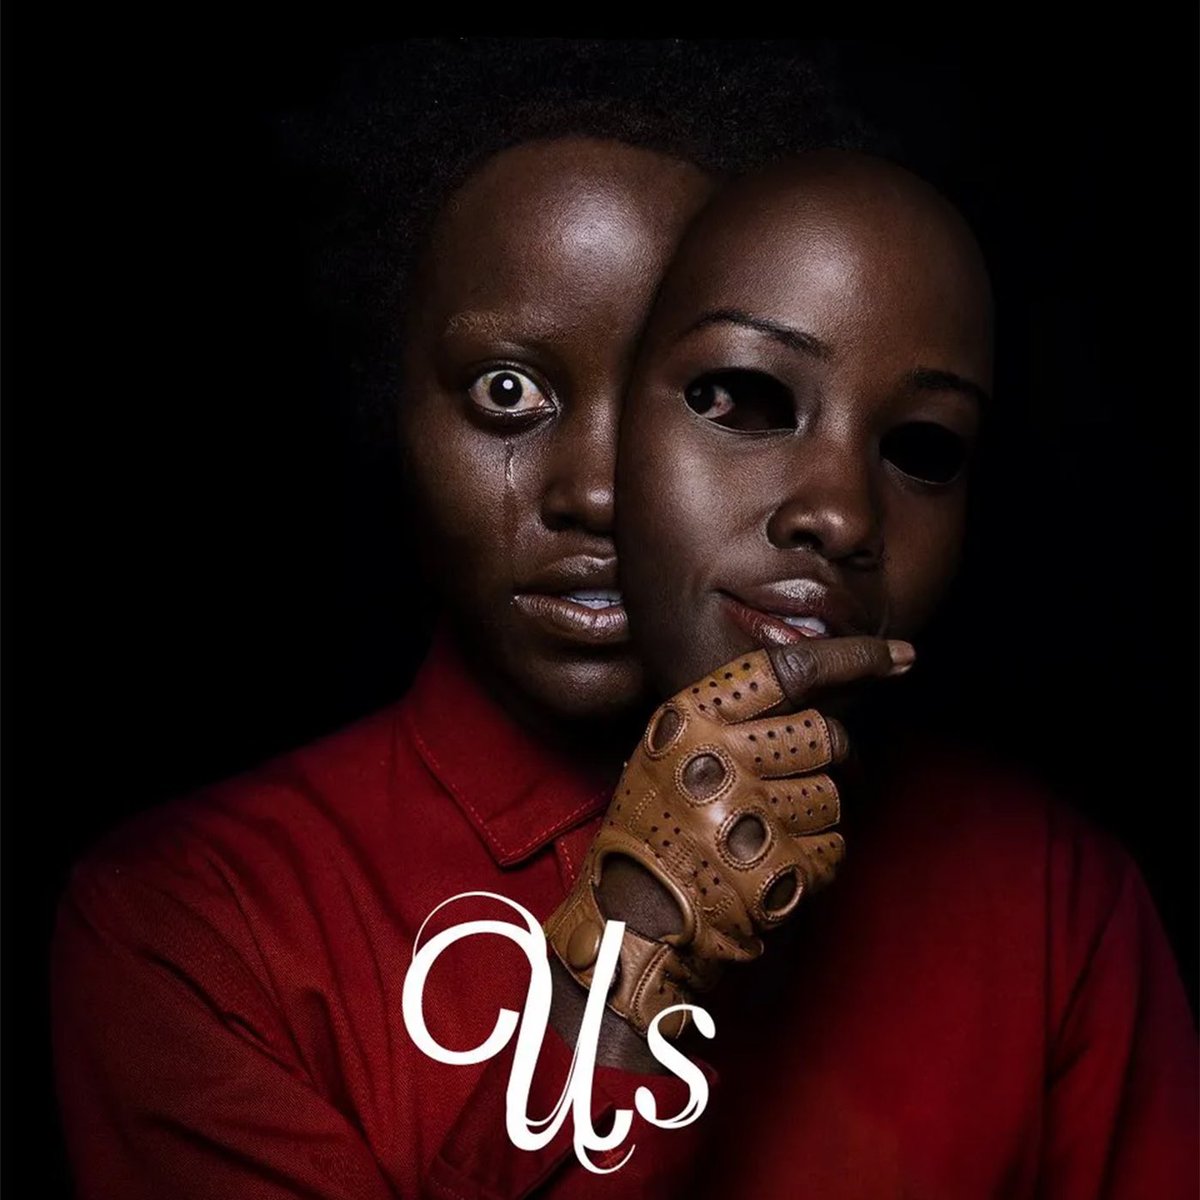 Tonight, the listeners, are forcing our Horror Virgin @toddjawesome to revisit the #jordanpeele masterclass #Us. What is your favorite part of this Metaphor heavy horror movie?